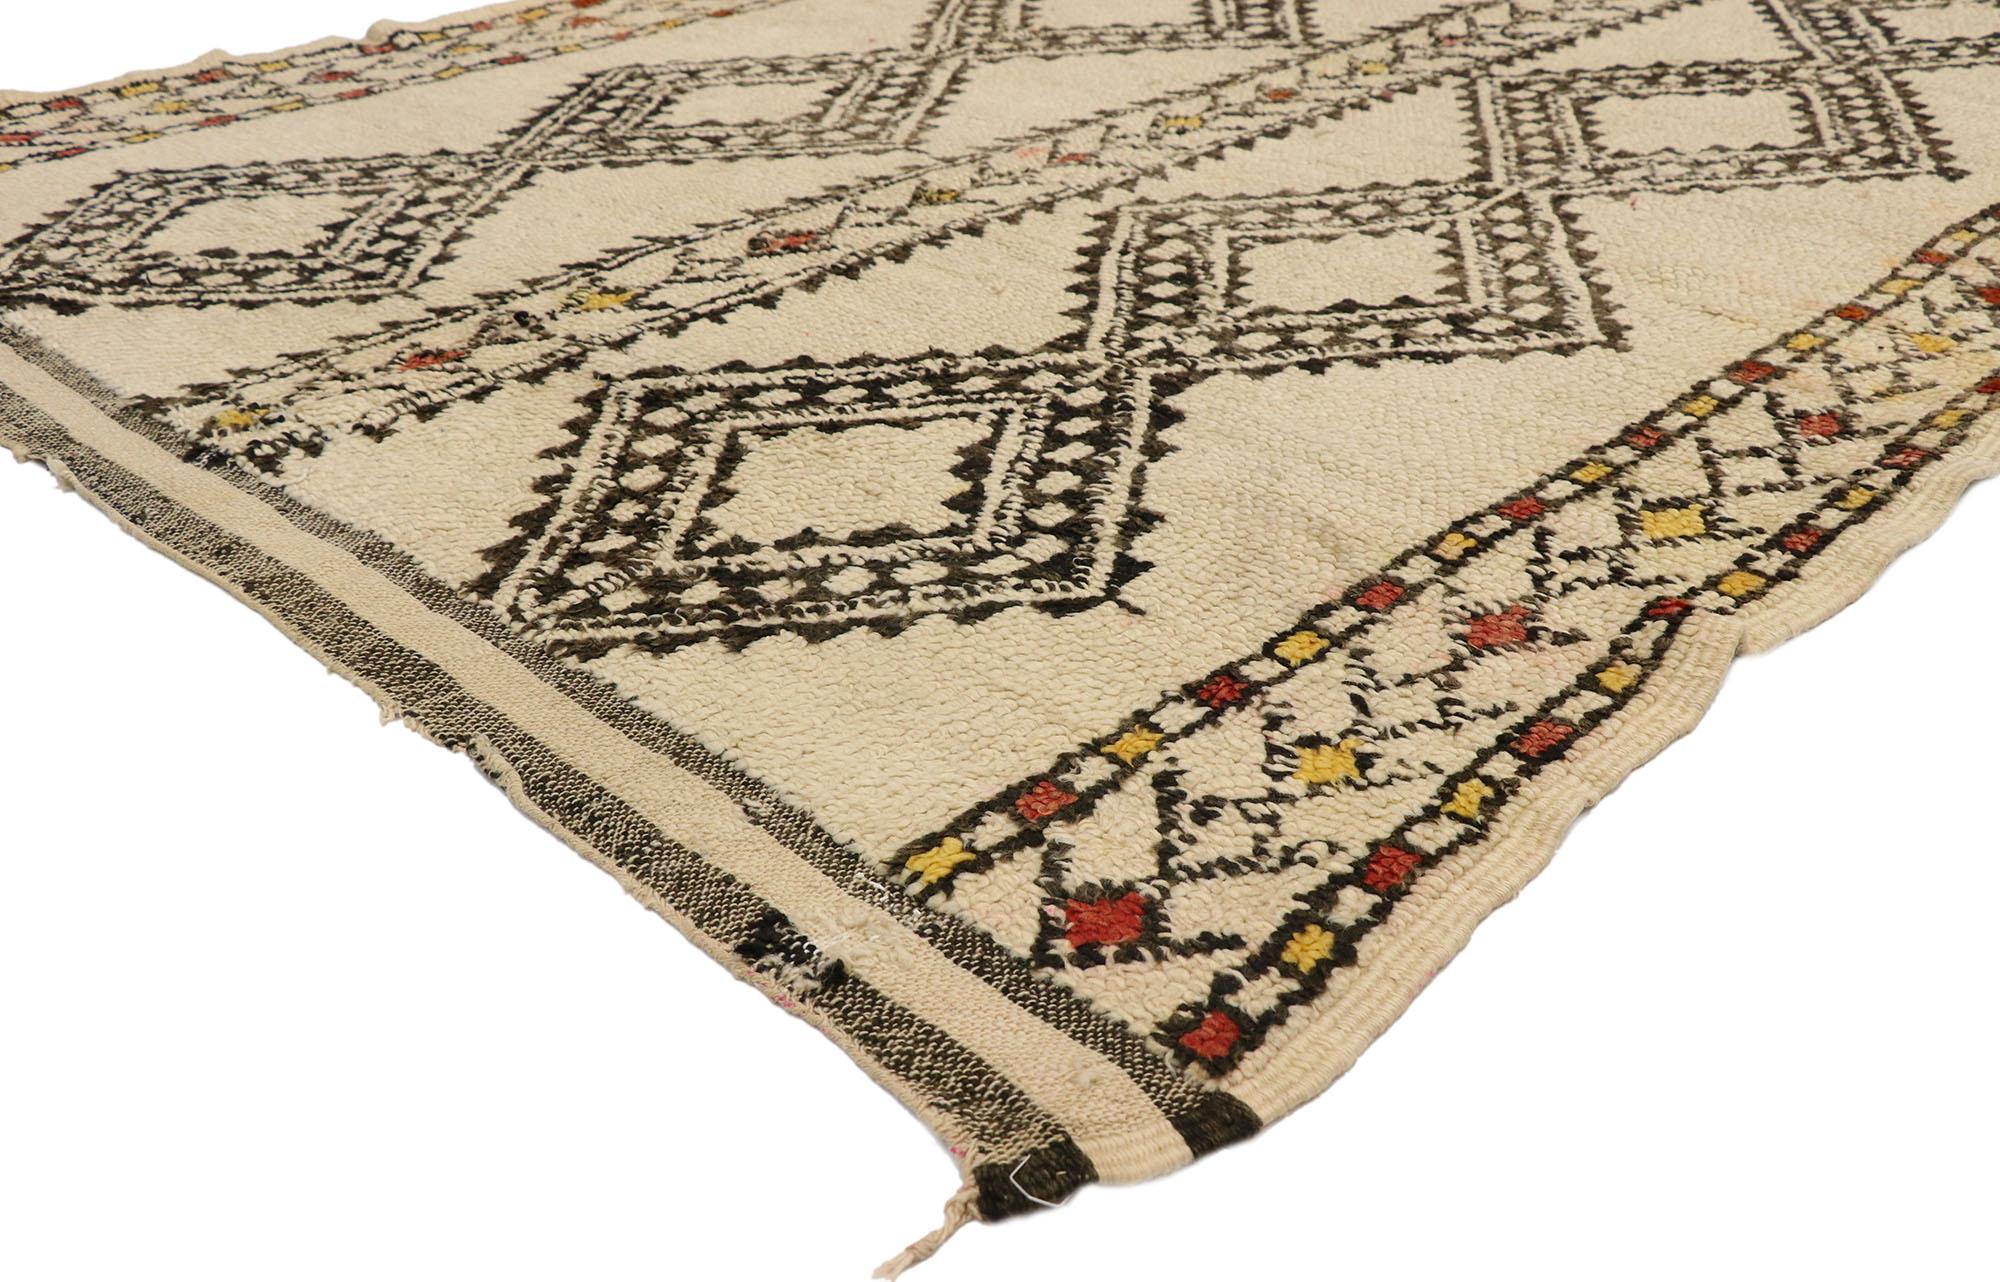 20990, vintage Beni Ourain Moroccan Rug with Mid-Century Modern style and Hygge vibes. With its clean sophistication and Hygge vibes, this hand knotted wool vintage Beni Ourain Moroccan rug provides a feeling of cozy contentment. It features two